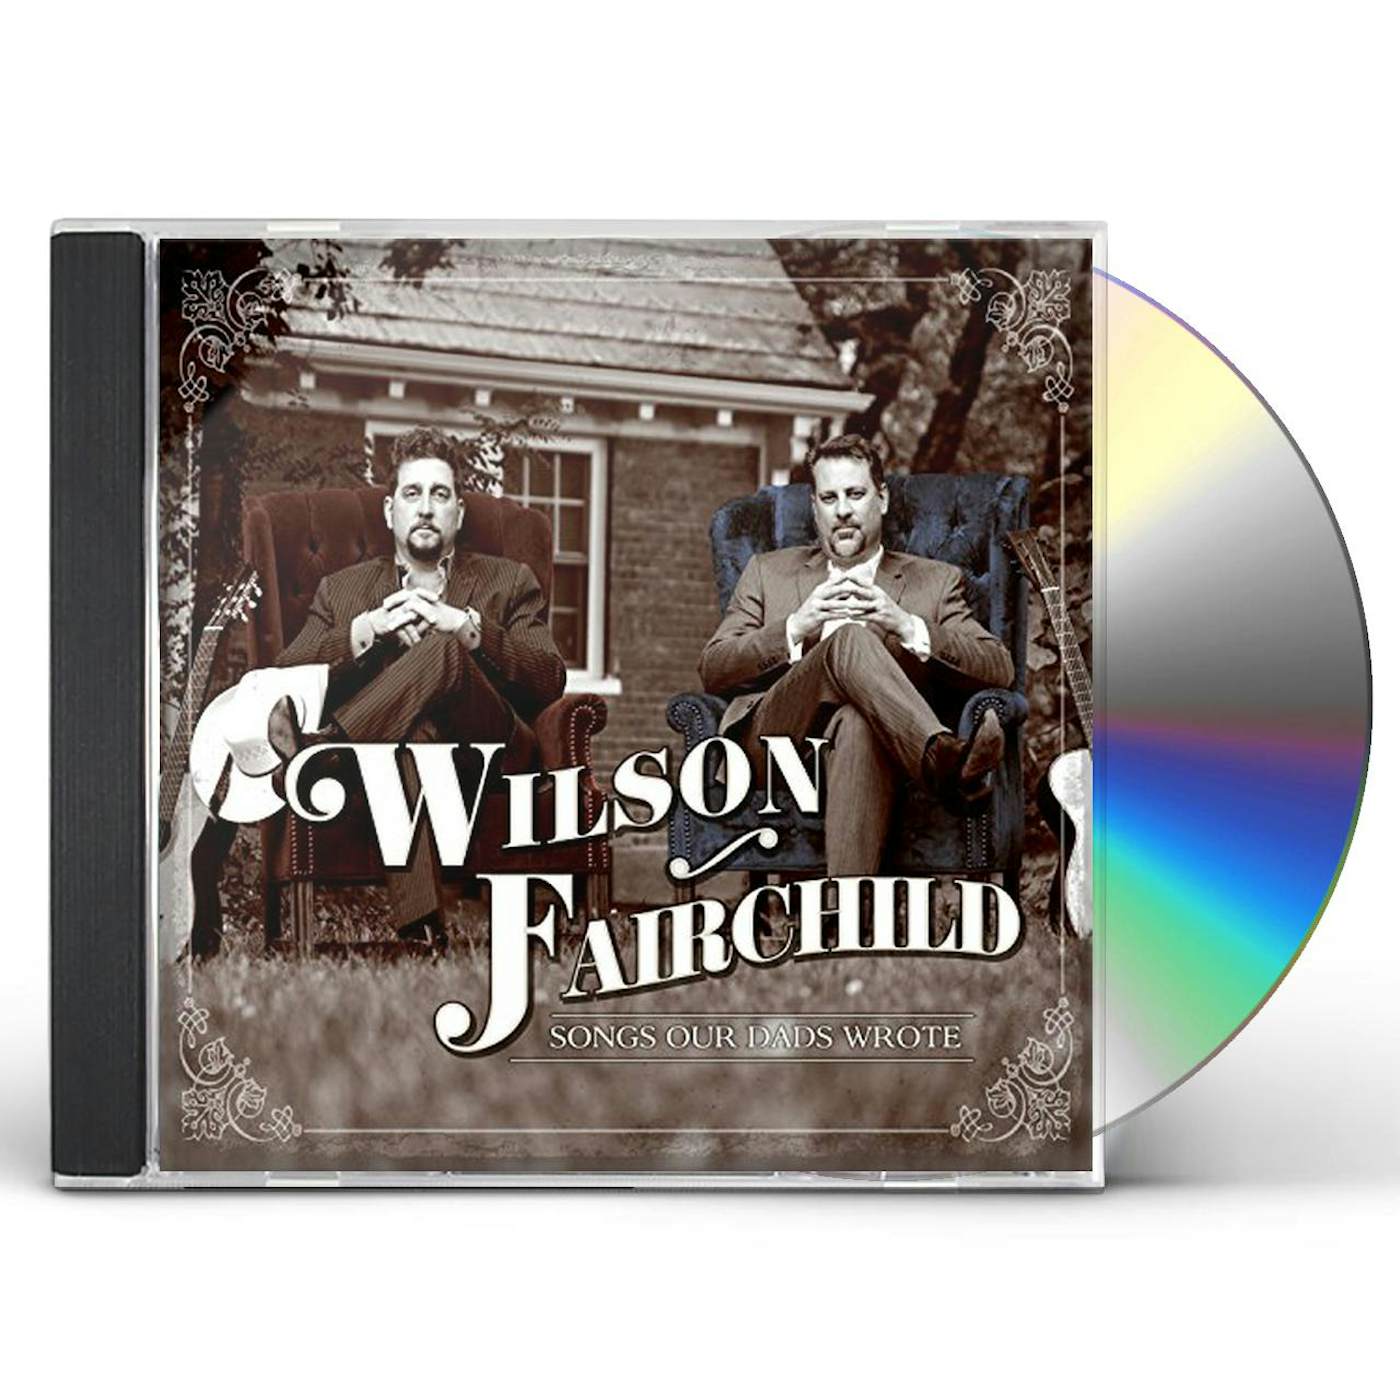 Wilson Fairchild SONGS OUR DADS WROTE CD